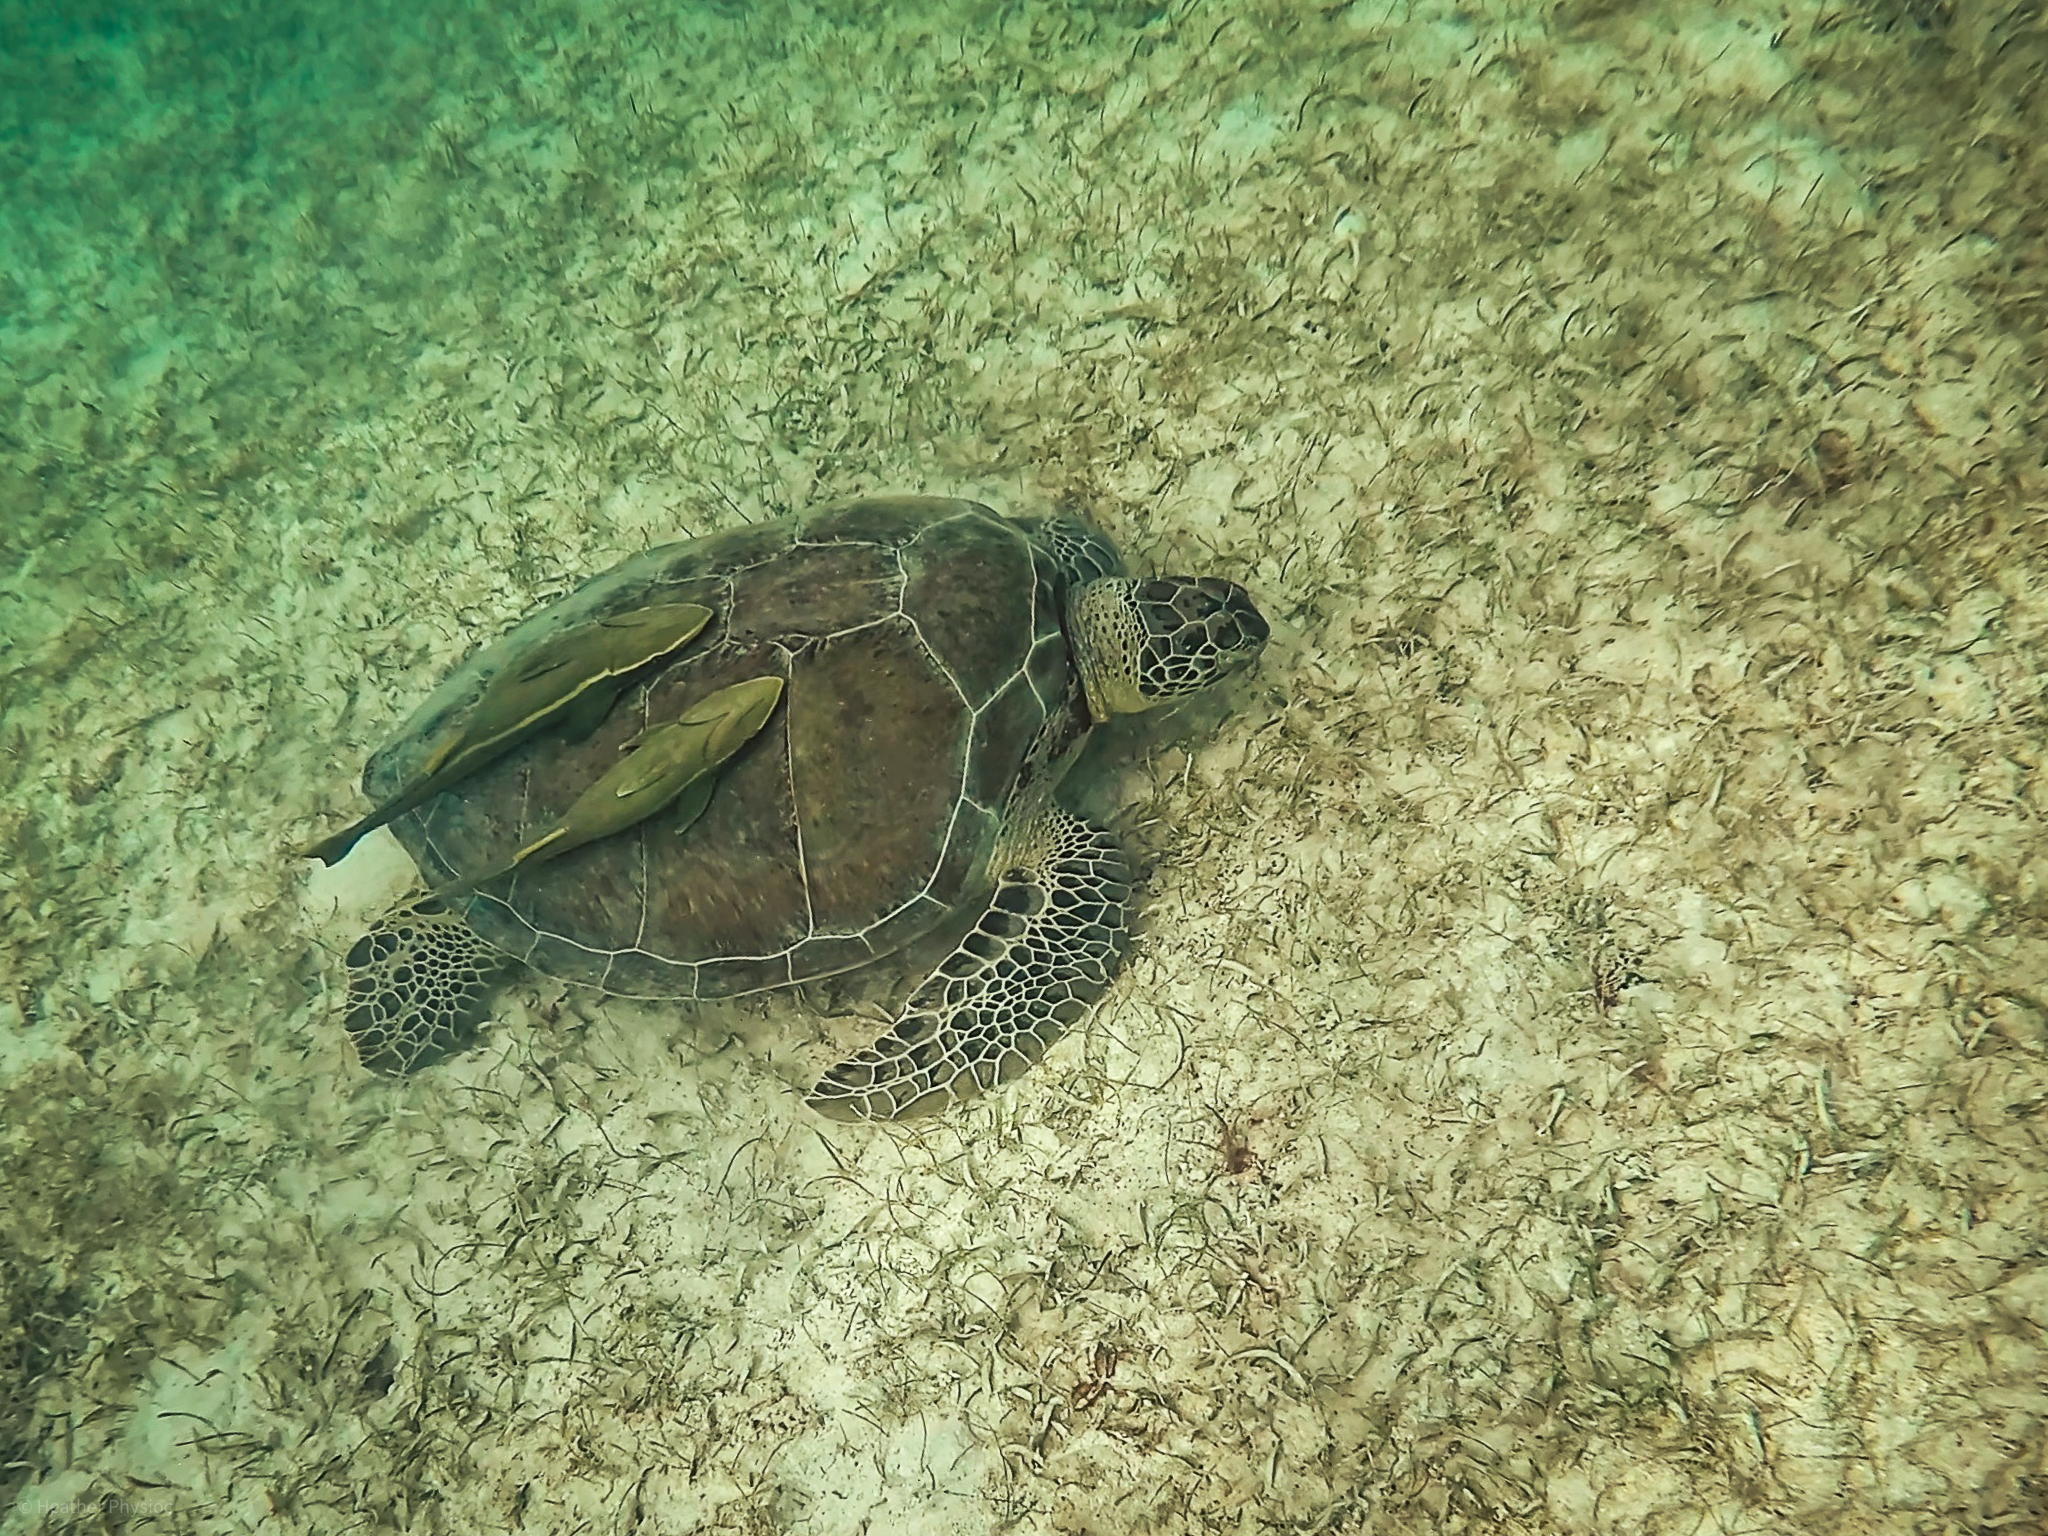 A green sea turtle accompanied by two remora fish attached to its shell, swimming near the ocean floor in Akumal Bay, displaying symbiotic relationships in the wild.